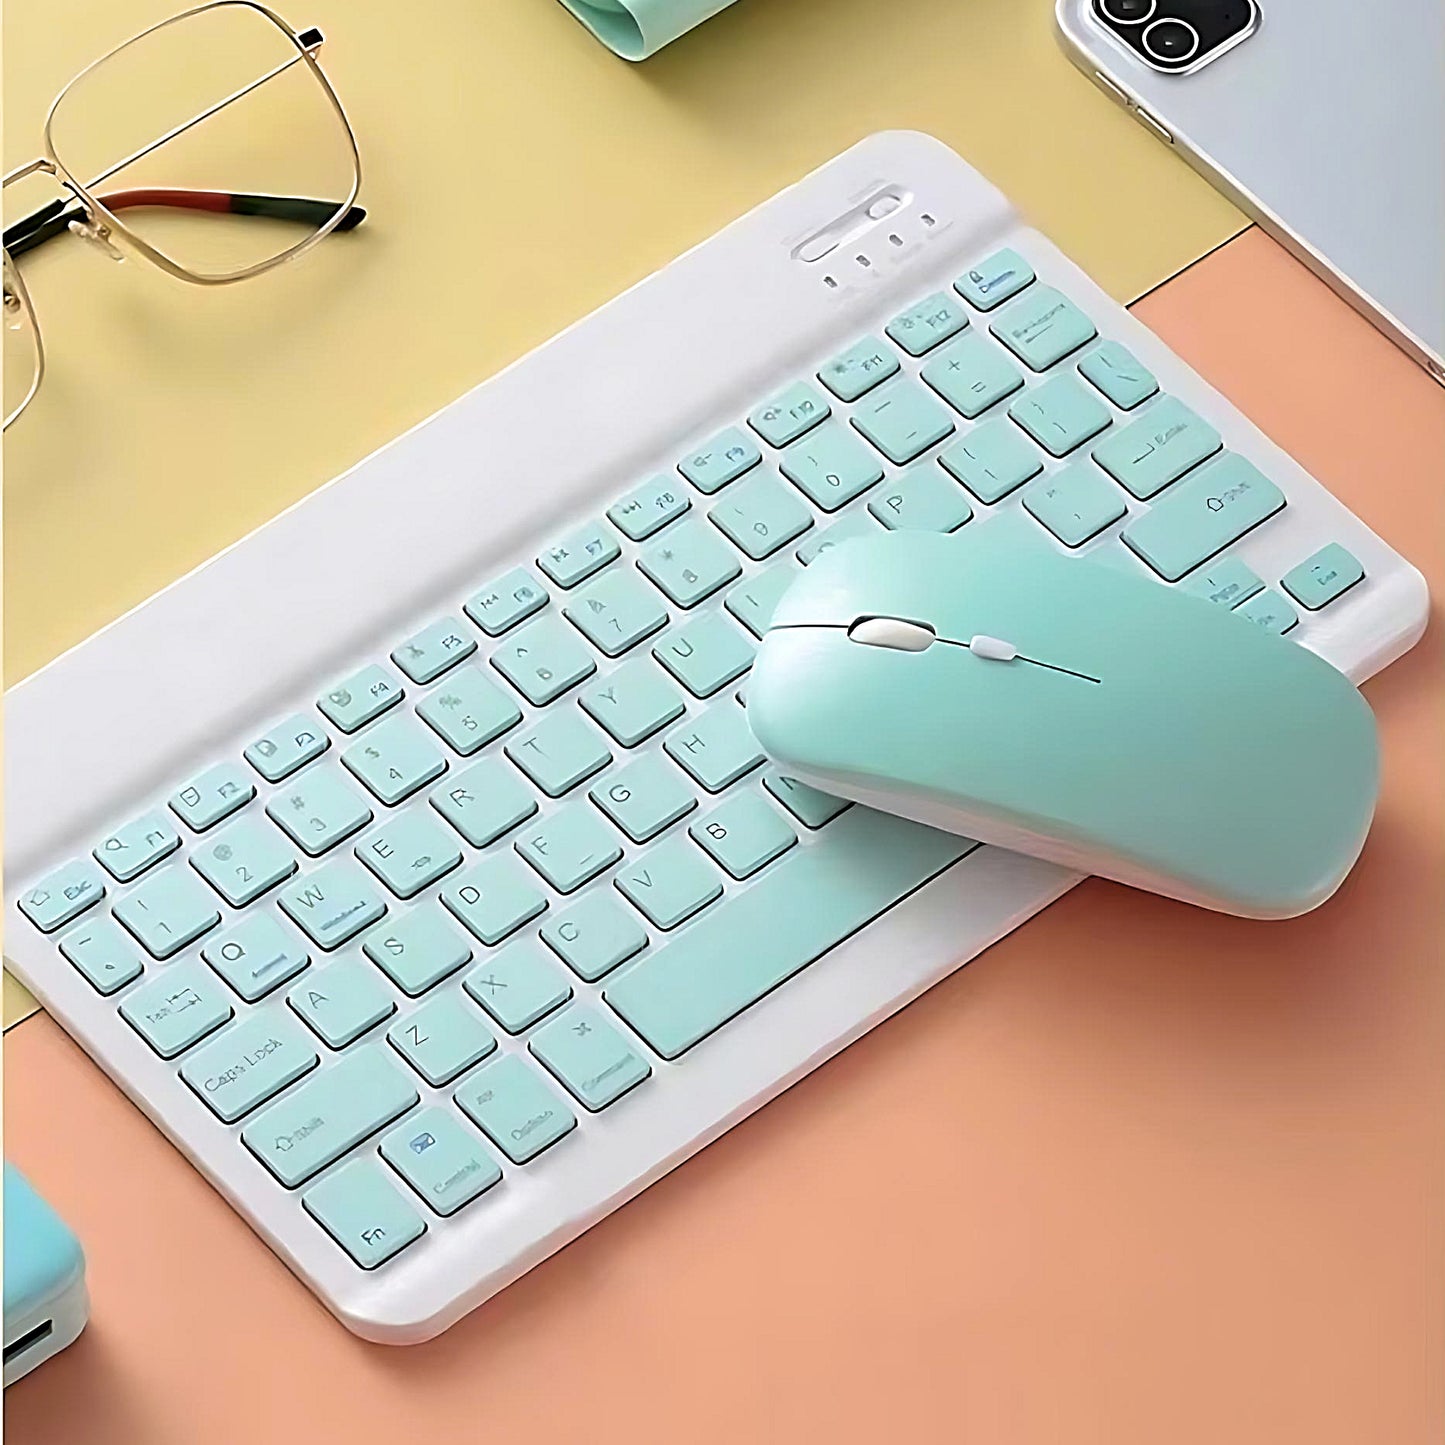 a pastel wireless keyboard and mouse set on a yellow and orange background